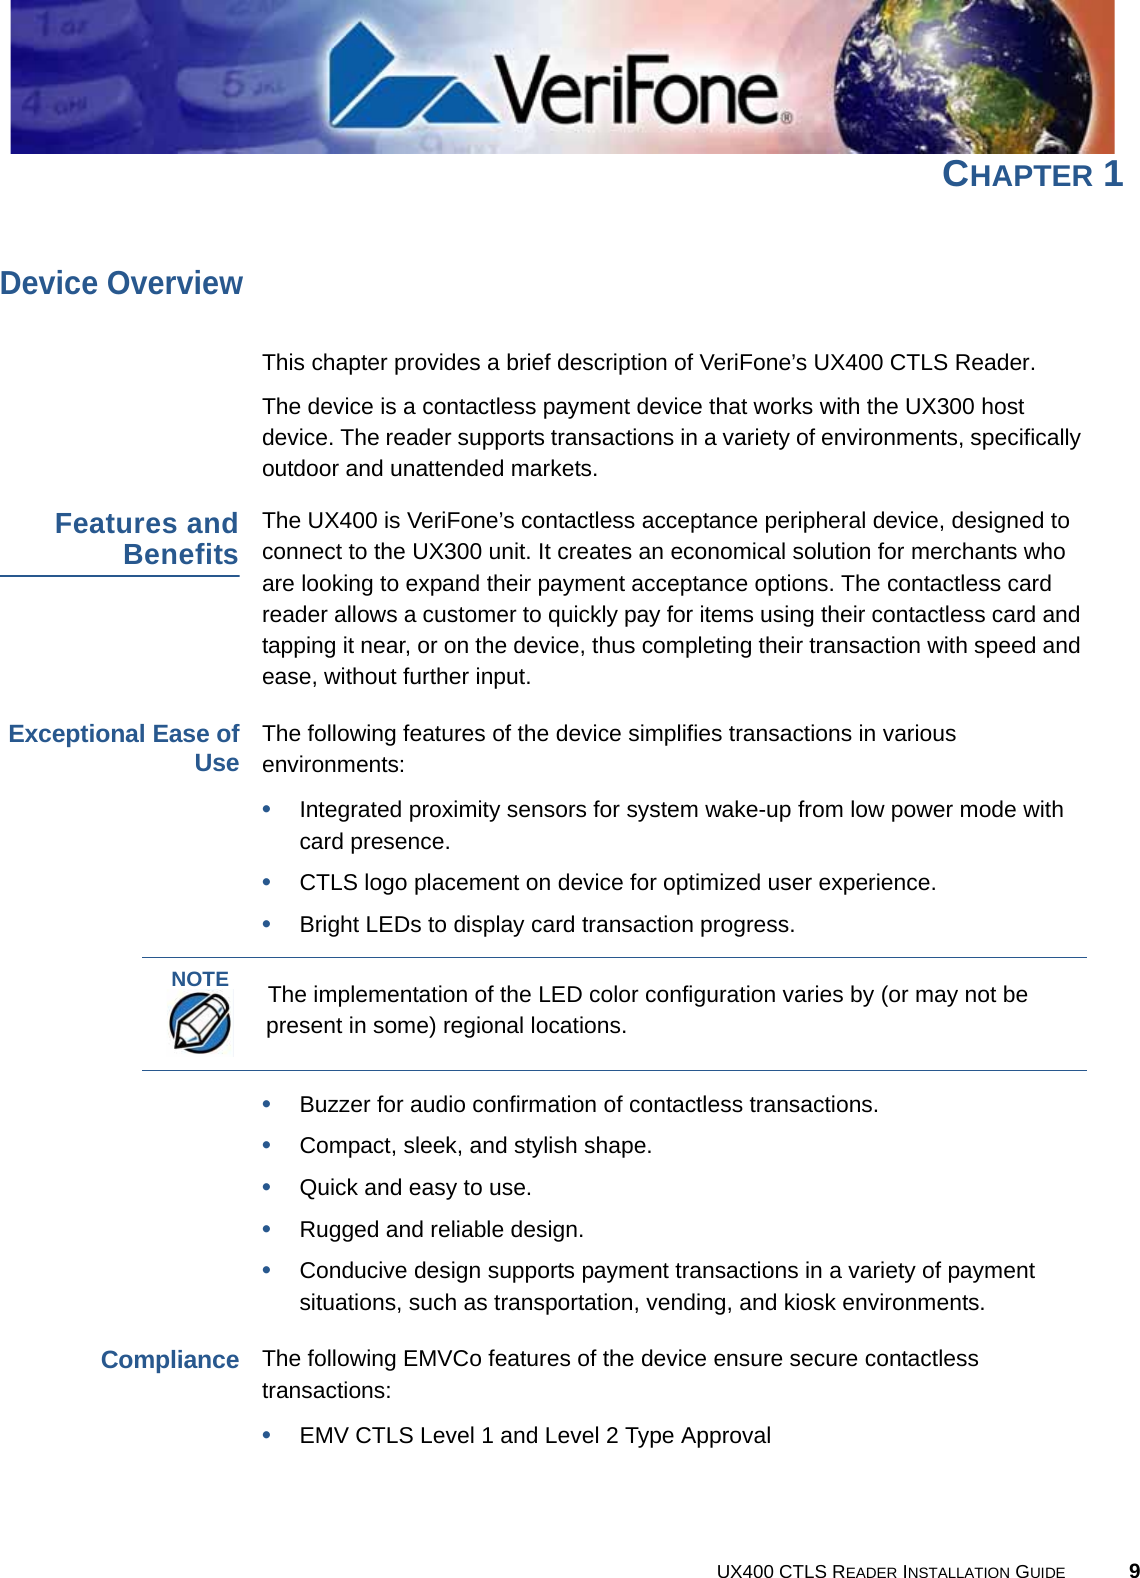 UX400 CTLS READER INSTALLATION GUIDE 9CHAPTER 1Device OverviewThis chapter provides a brief description of VeriFone’s UX400 CTLS Reader.The device is a contactless payment device that works with the UX300 host device. The reader supports transactions in a variety of environments, specifically outdoor and unattended markets.Features andBenefitsThe UX400 is VeriFone’s contactless acceptance peripheral device, designed to connect to the UX300 unit. It creates an economical solution for merchants who are looking to expand their payment acceptance options. The contactless card reader allows a customer to quickly pay for items using their contactless card and tapping it near, or on the device, thus completing their transaction with speed and ease, without further input.Exceptional Ease ofUseThe following features of the device simplifies transactions in various environments:•Integrated proximity sensors for system wake-up from low power mode with card presence.•CTLS logo placement on device for optimized user experience.•Bright LEDs to display card transaction progress.•Buzzer for audio confirmation of contactless transactions.•Compact, sleek, and stylish shape.•Quick and easy to use.•Rugged and reliable design.•Conducive design supports payment transactions in a variety of payment situations, such as transportation, vending, and kiosk environments.ComplianceThe following EMVCo features of the device ensure secure contactless transactions:•EMV CTLS Level 1 and Level 2 Type ApprovalNOTEThe implementation of the LED color configuration varies by (or may not be present in some) regional locations.